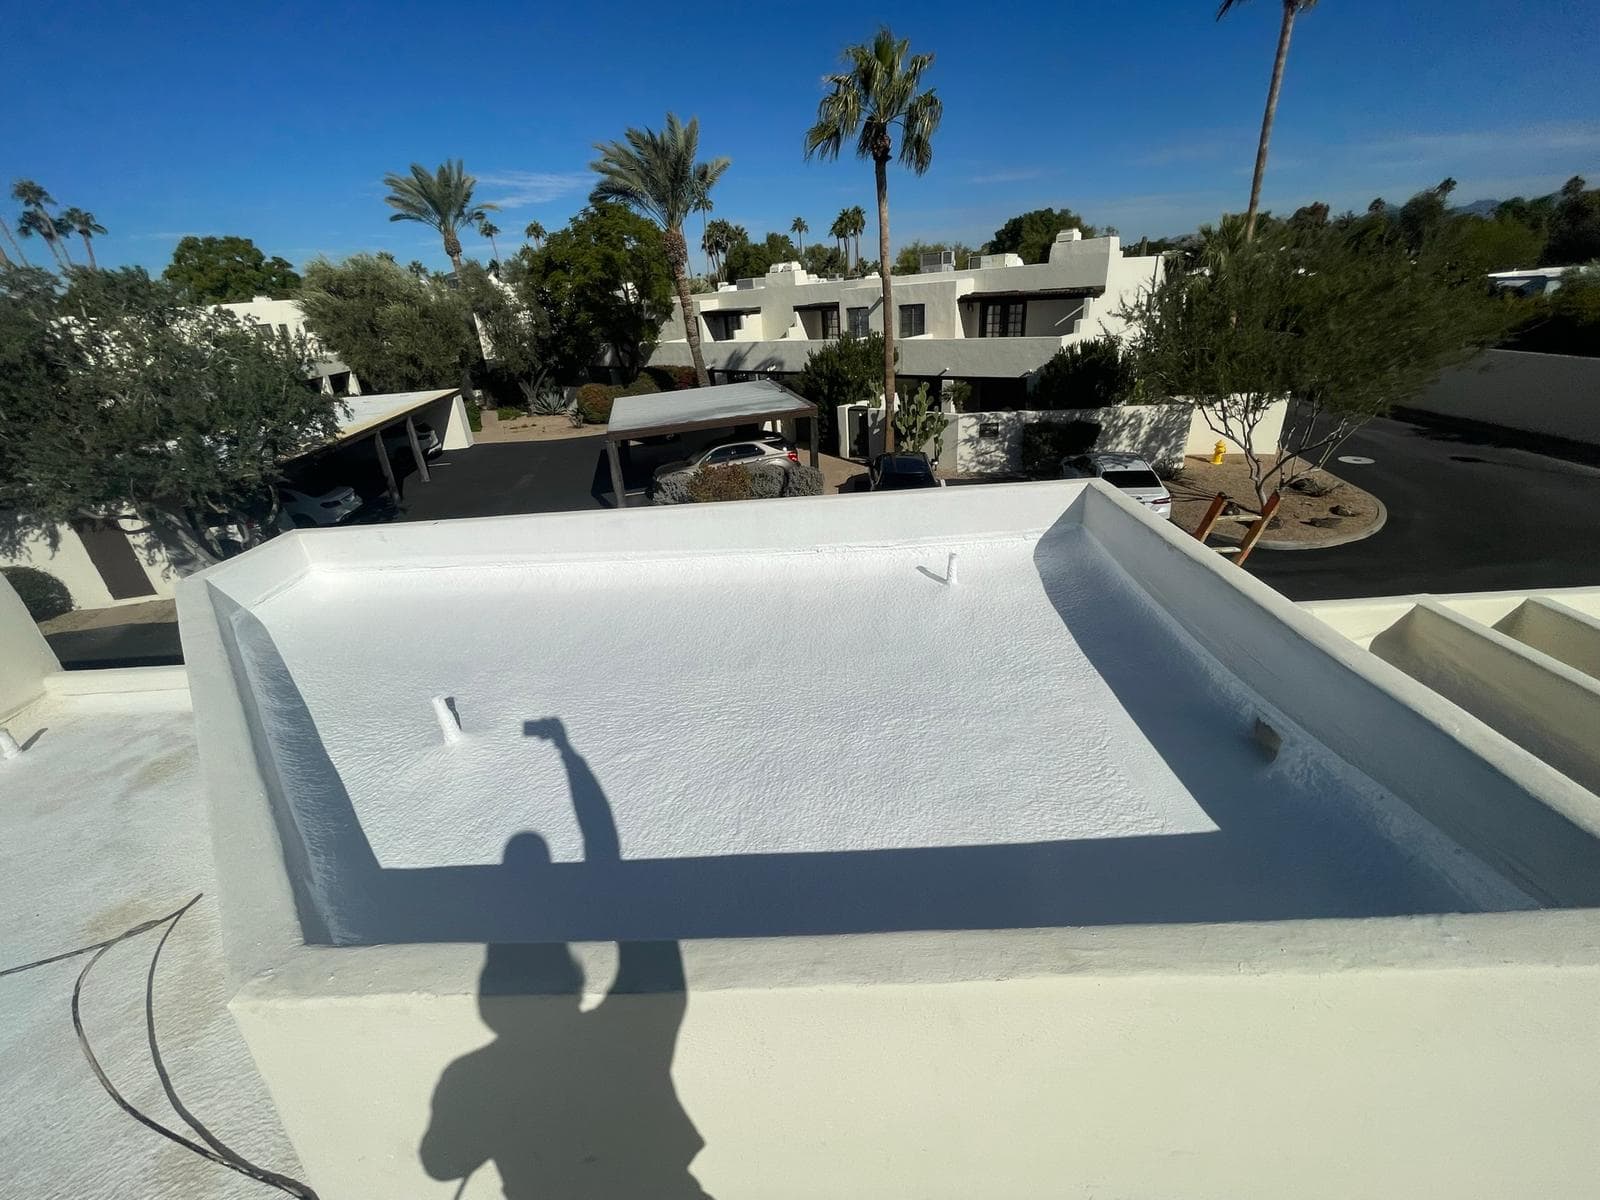 A white roof featuring a palm tree backdrop, designed by an Ironwood roofing contractor.